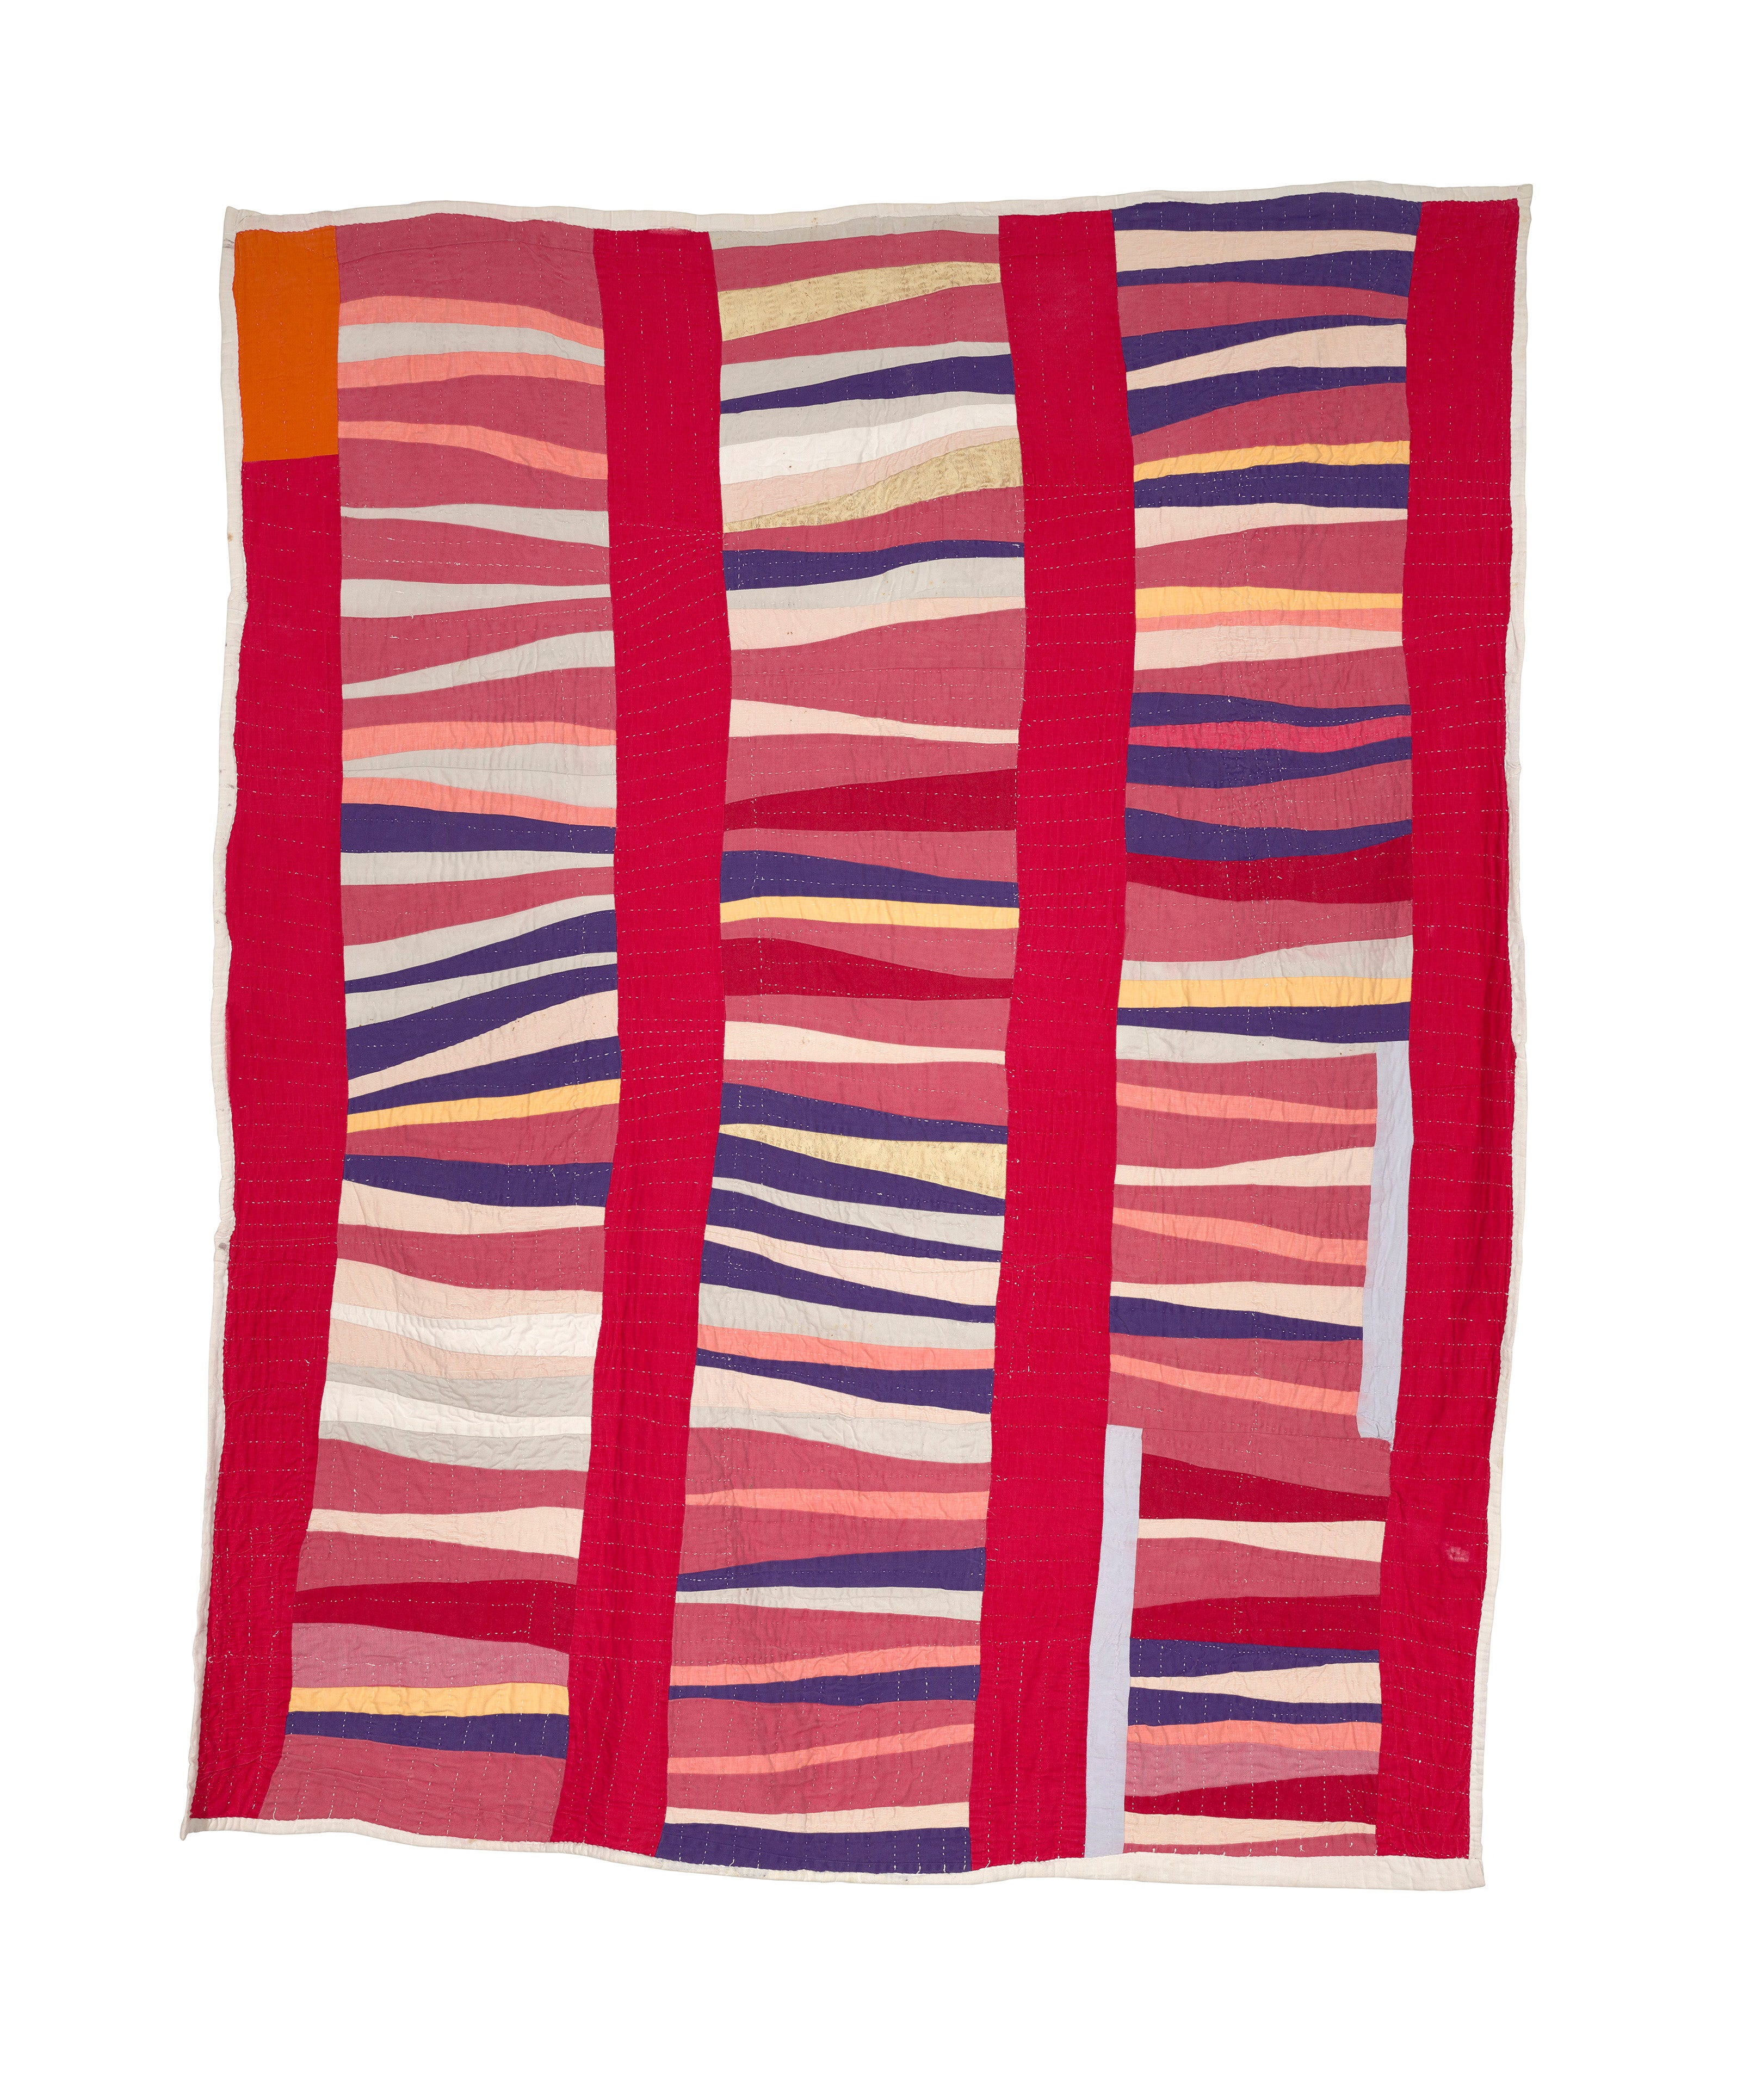 Geometric quilt in red, blue, orange, yellow, pink, and white